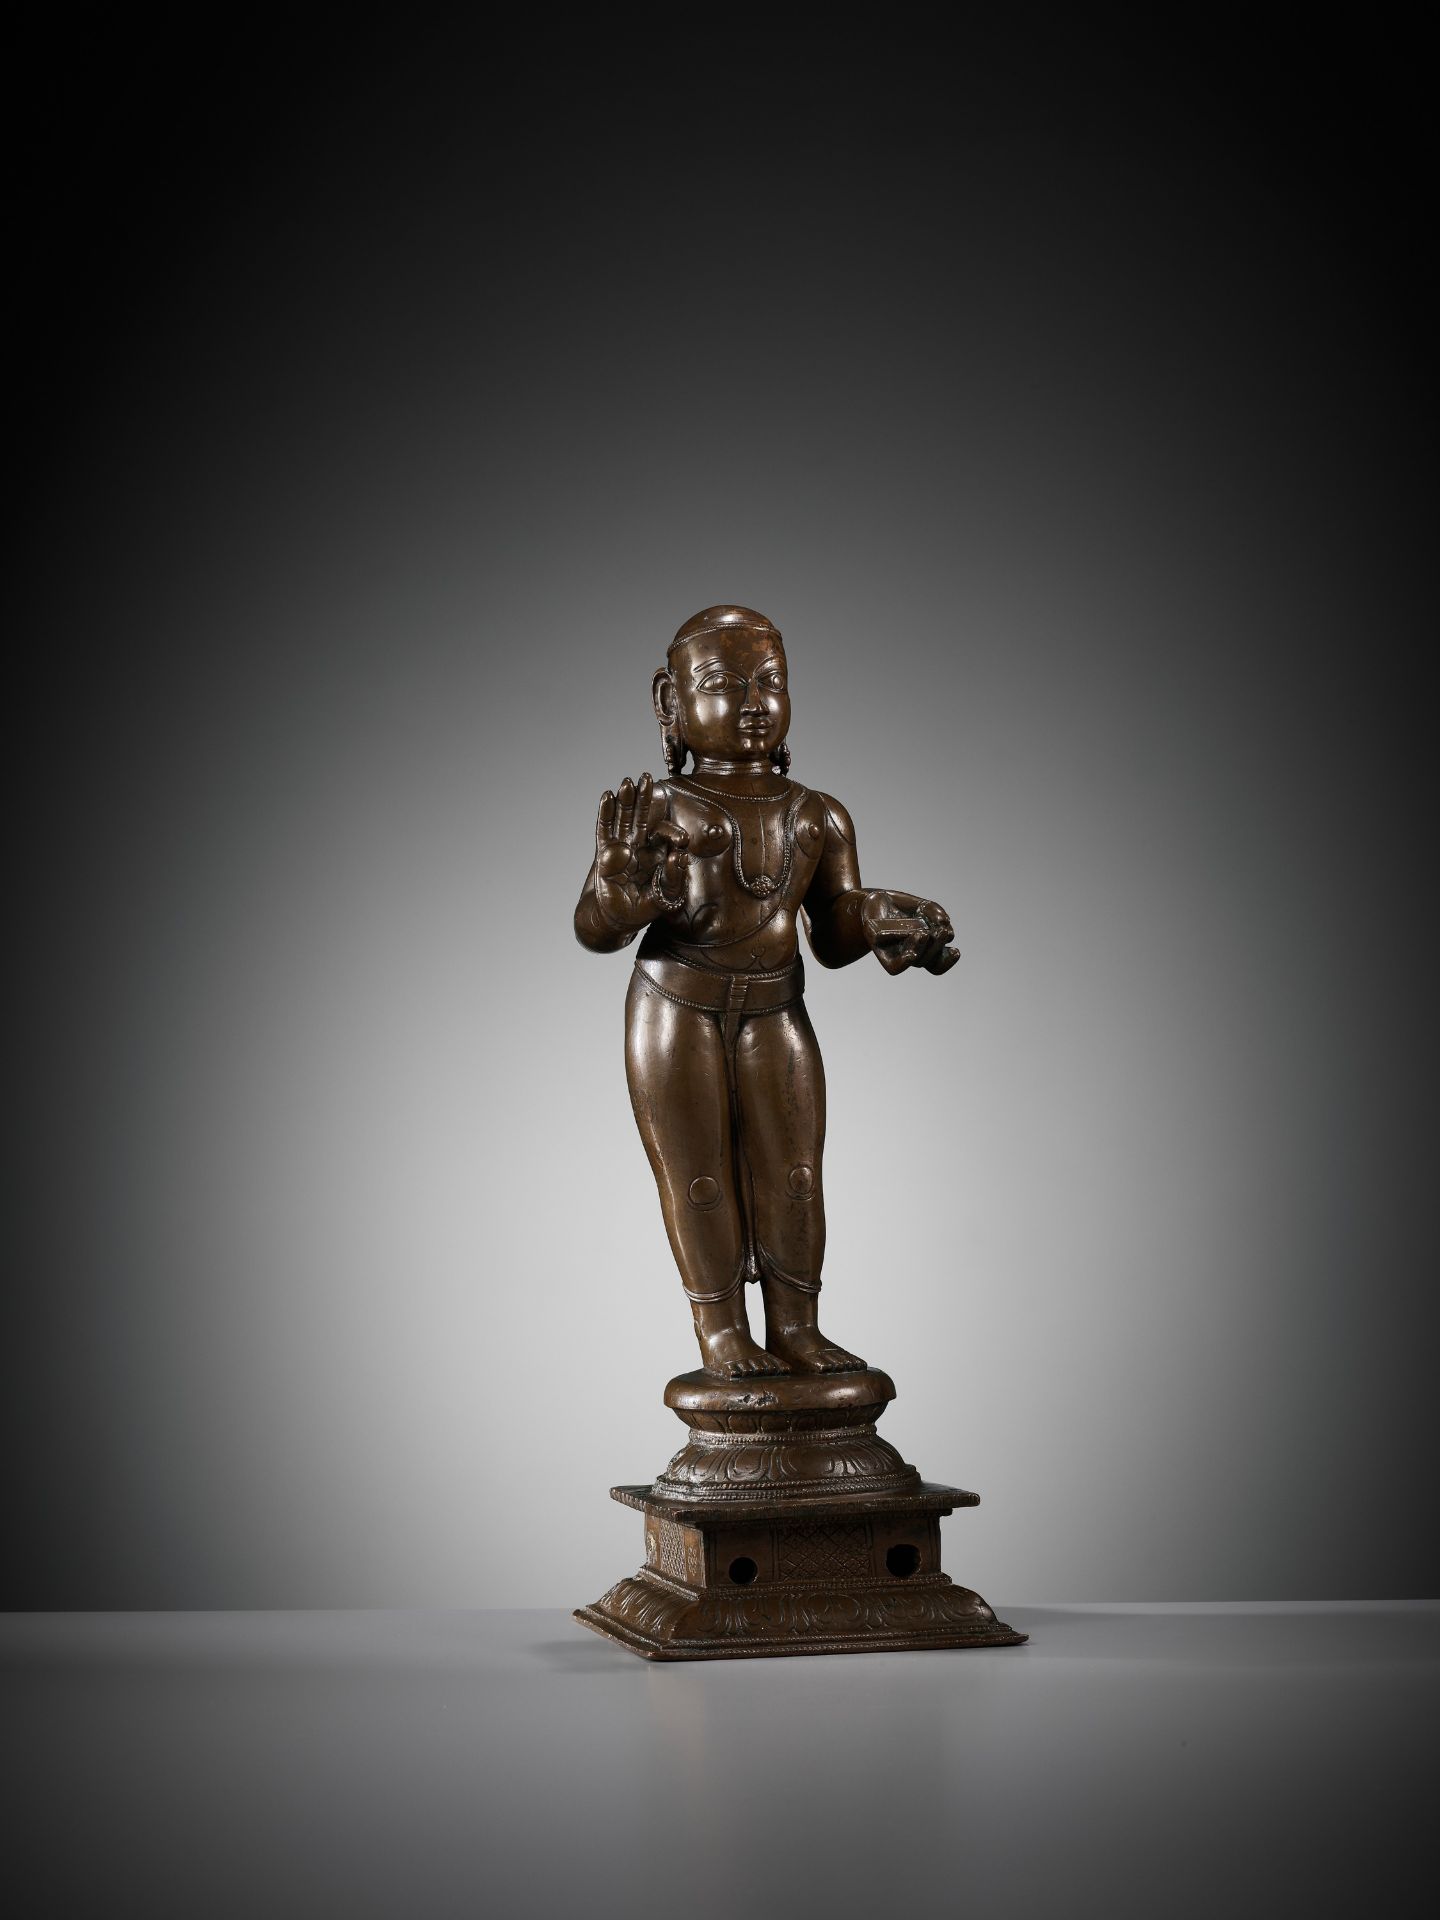 A LARGE COPPER ALLOY FIGURE OF MANIKKAVACAKAR, TAMIL NADU, 14TH-15TH CENTURY - Image 9 of 16